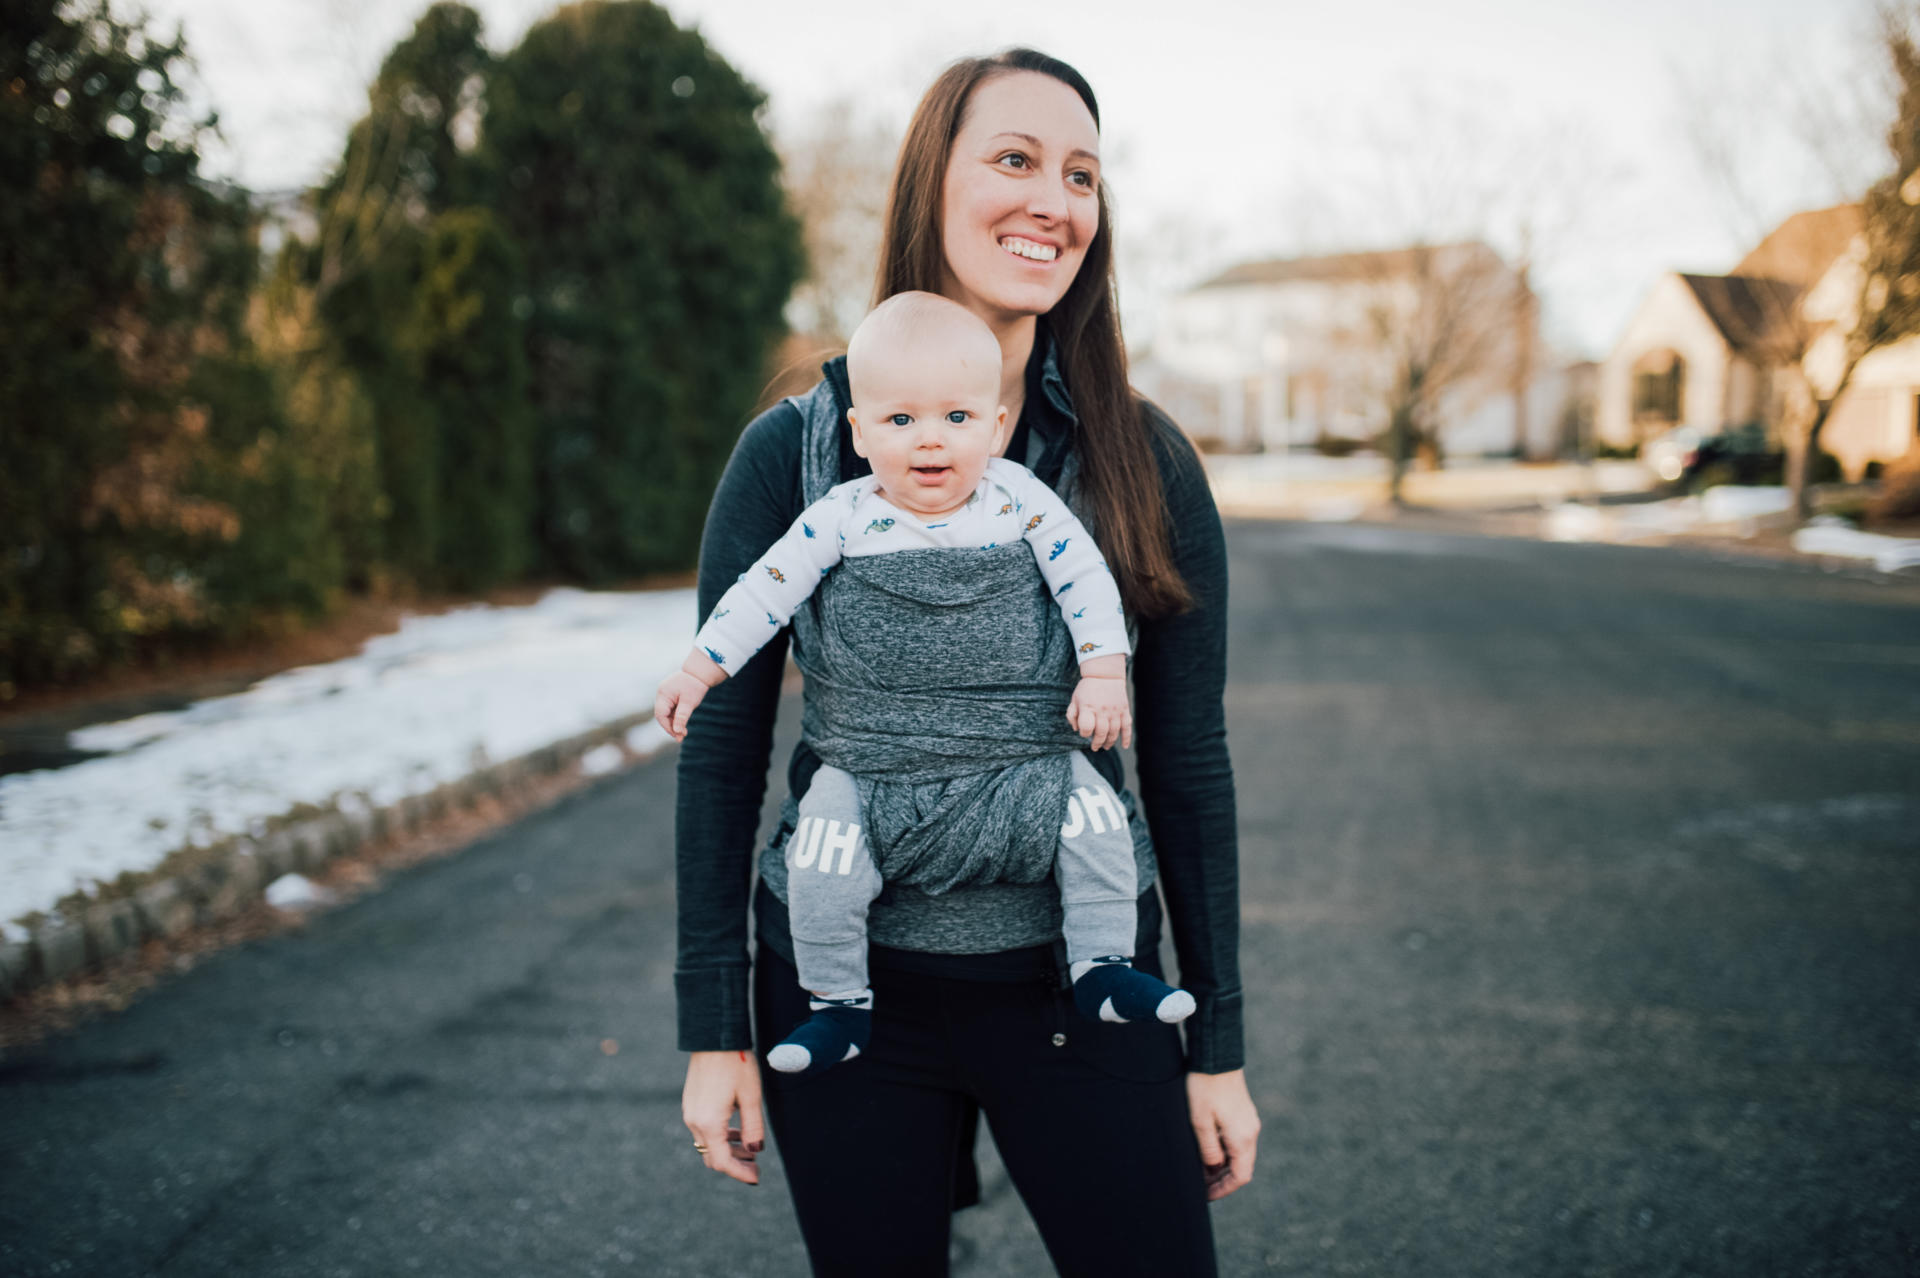 Boppy Review by popular New Jersey mommy blogger What's For Dinner Esq.